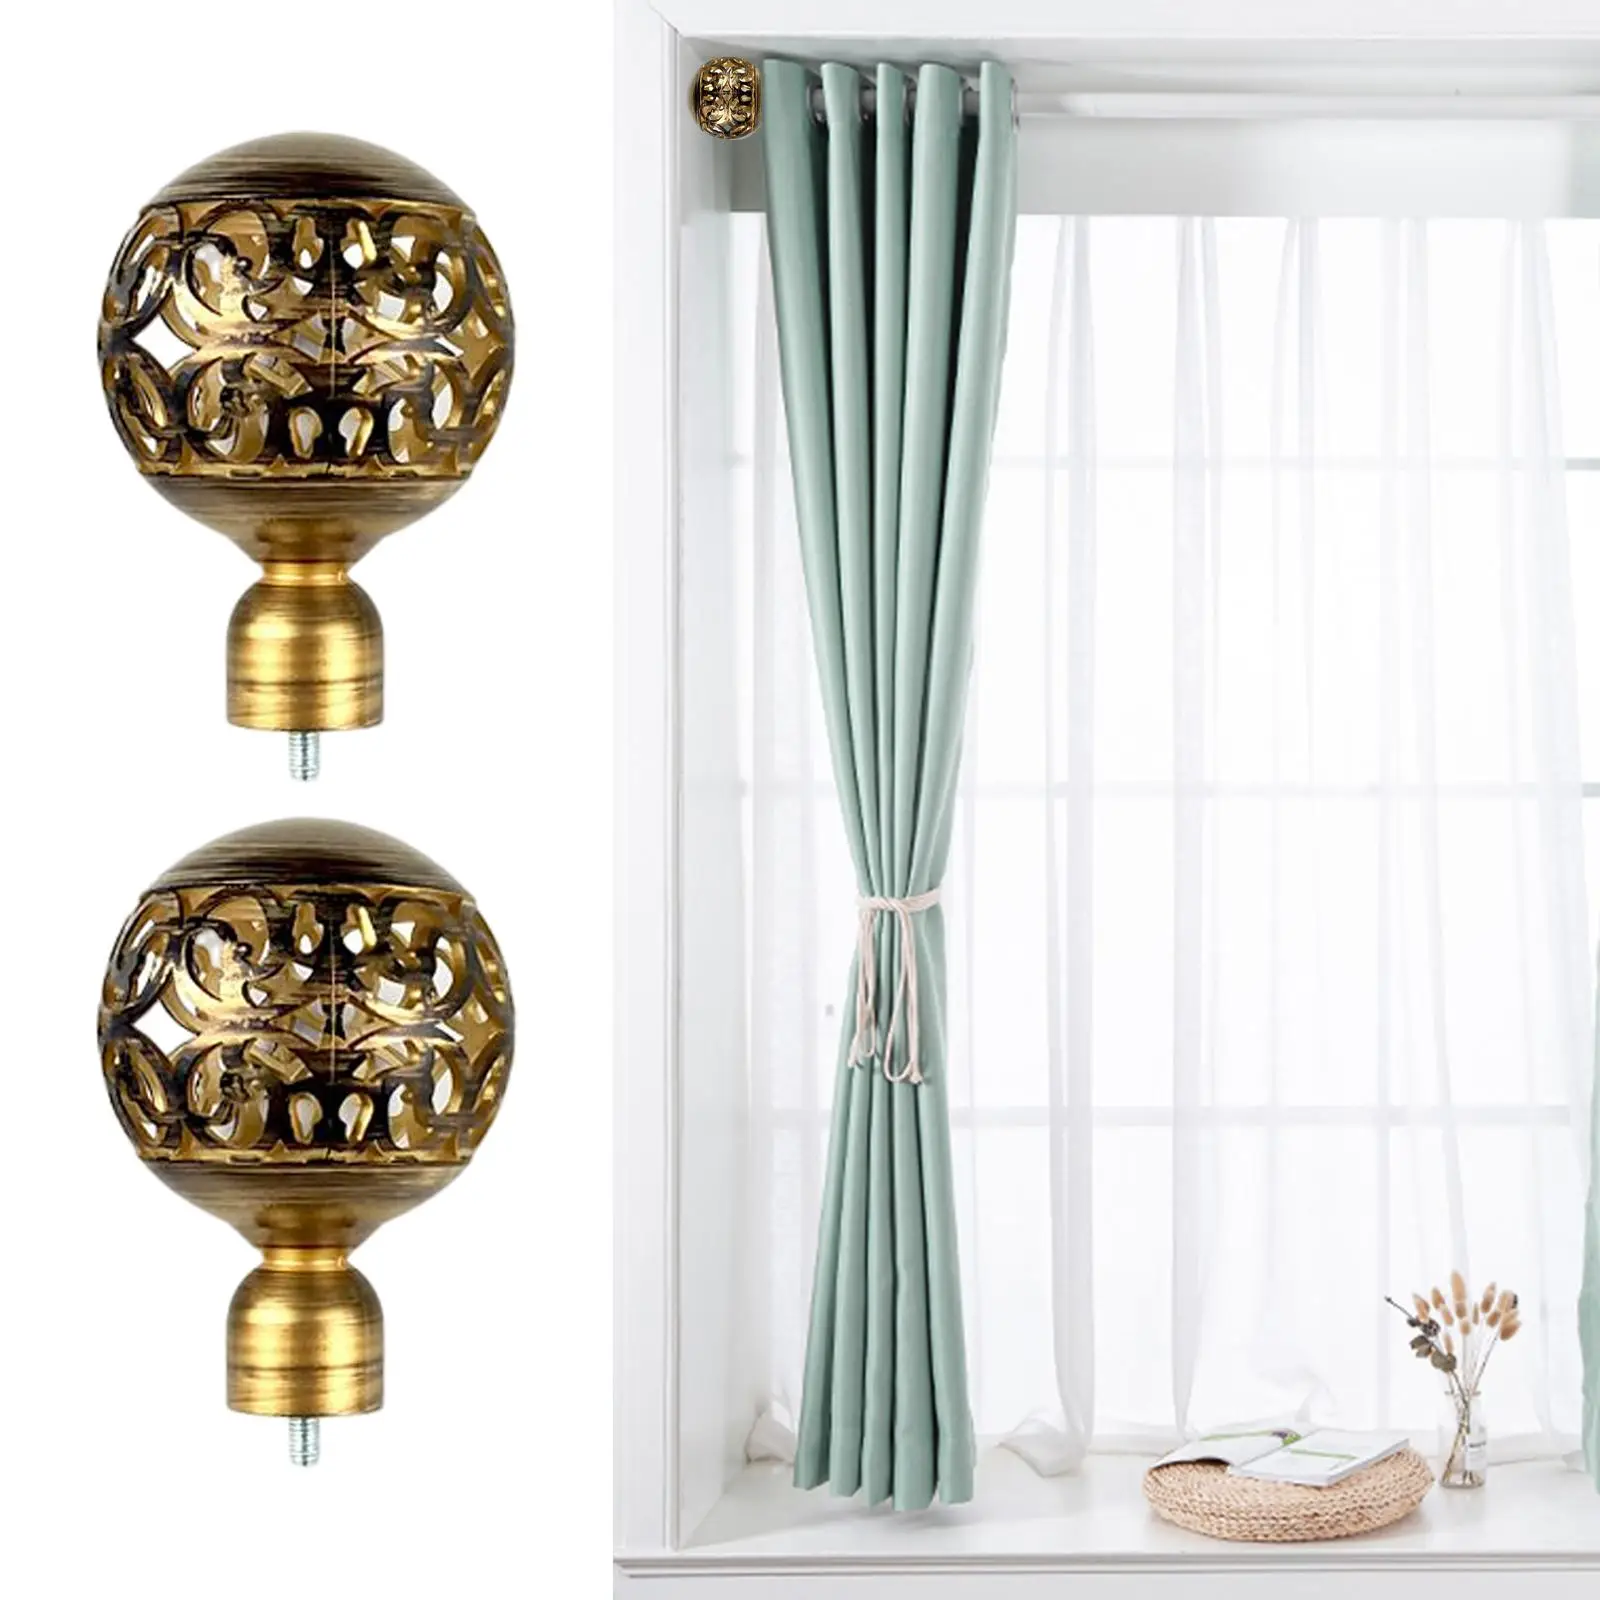 2Pcs Replacement Curtain Rod Finials 3/4 inch Diameter Vintage Accessories Drapery Rod Finials for Office Bathroom Living Room